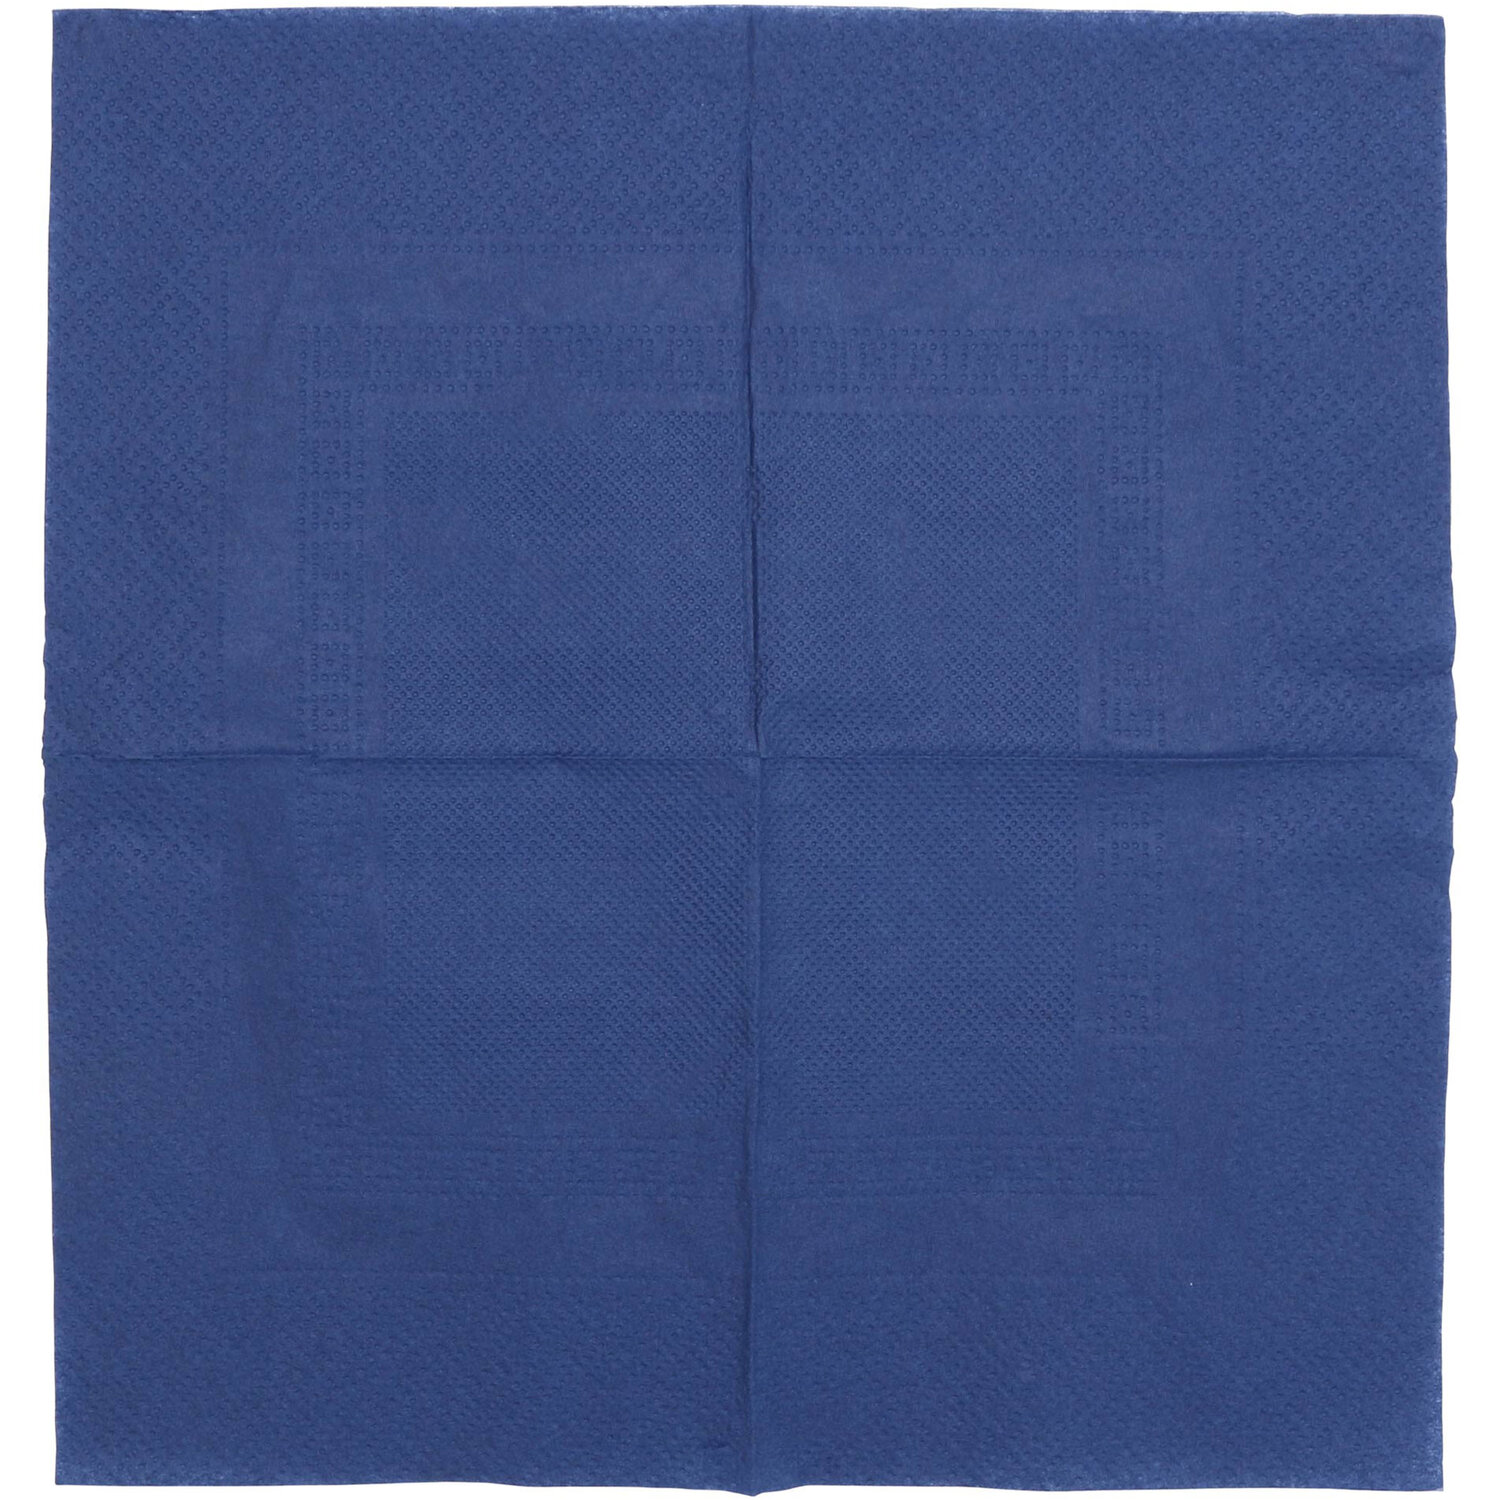 Pack of My Home Napkins - Blue Image 4